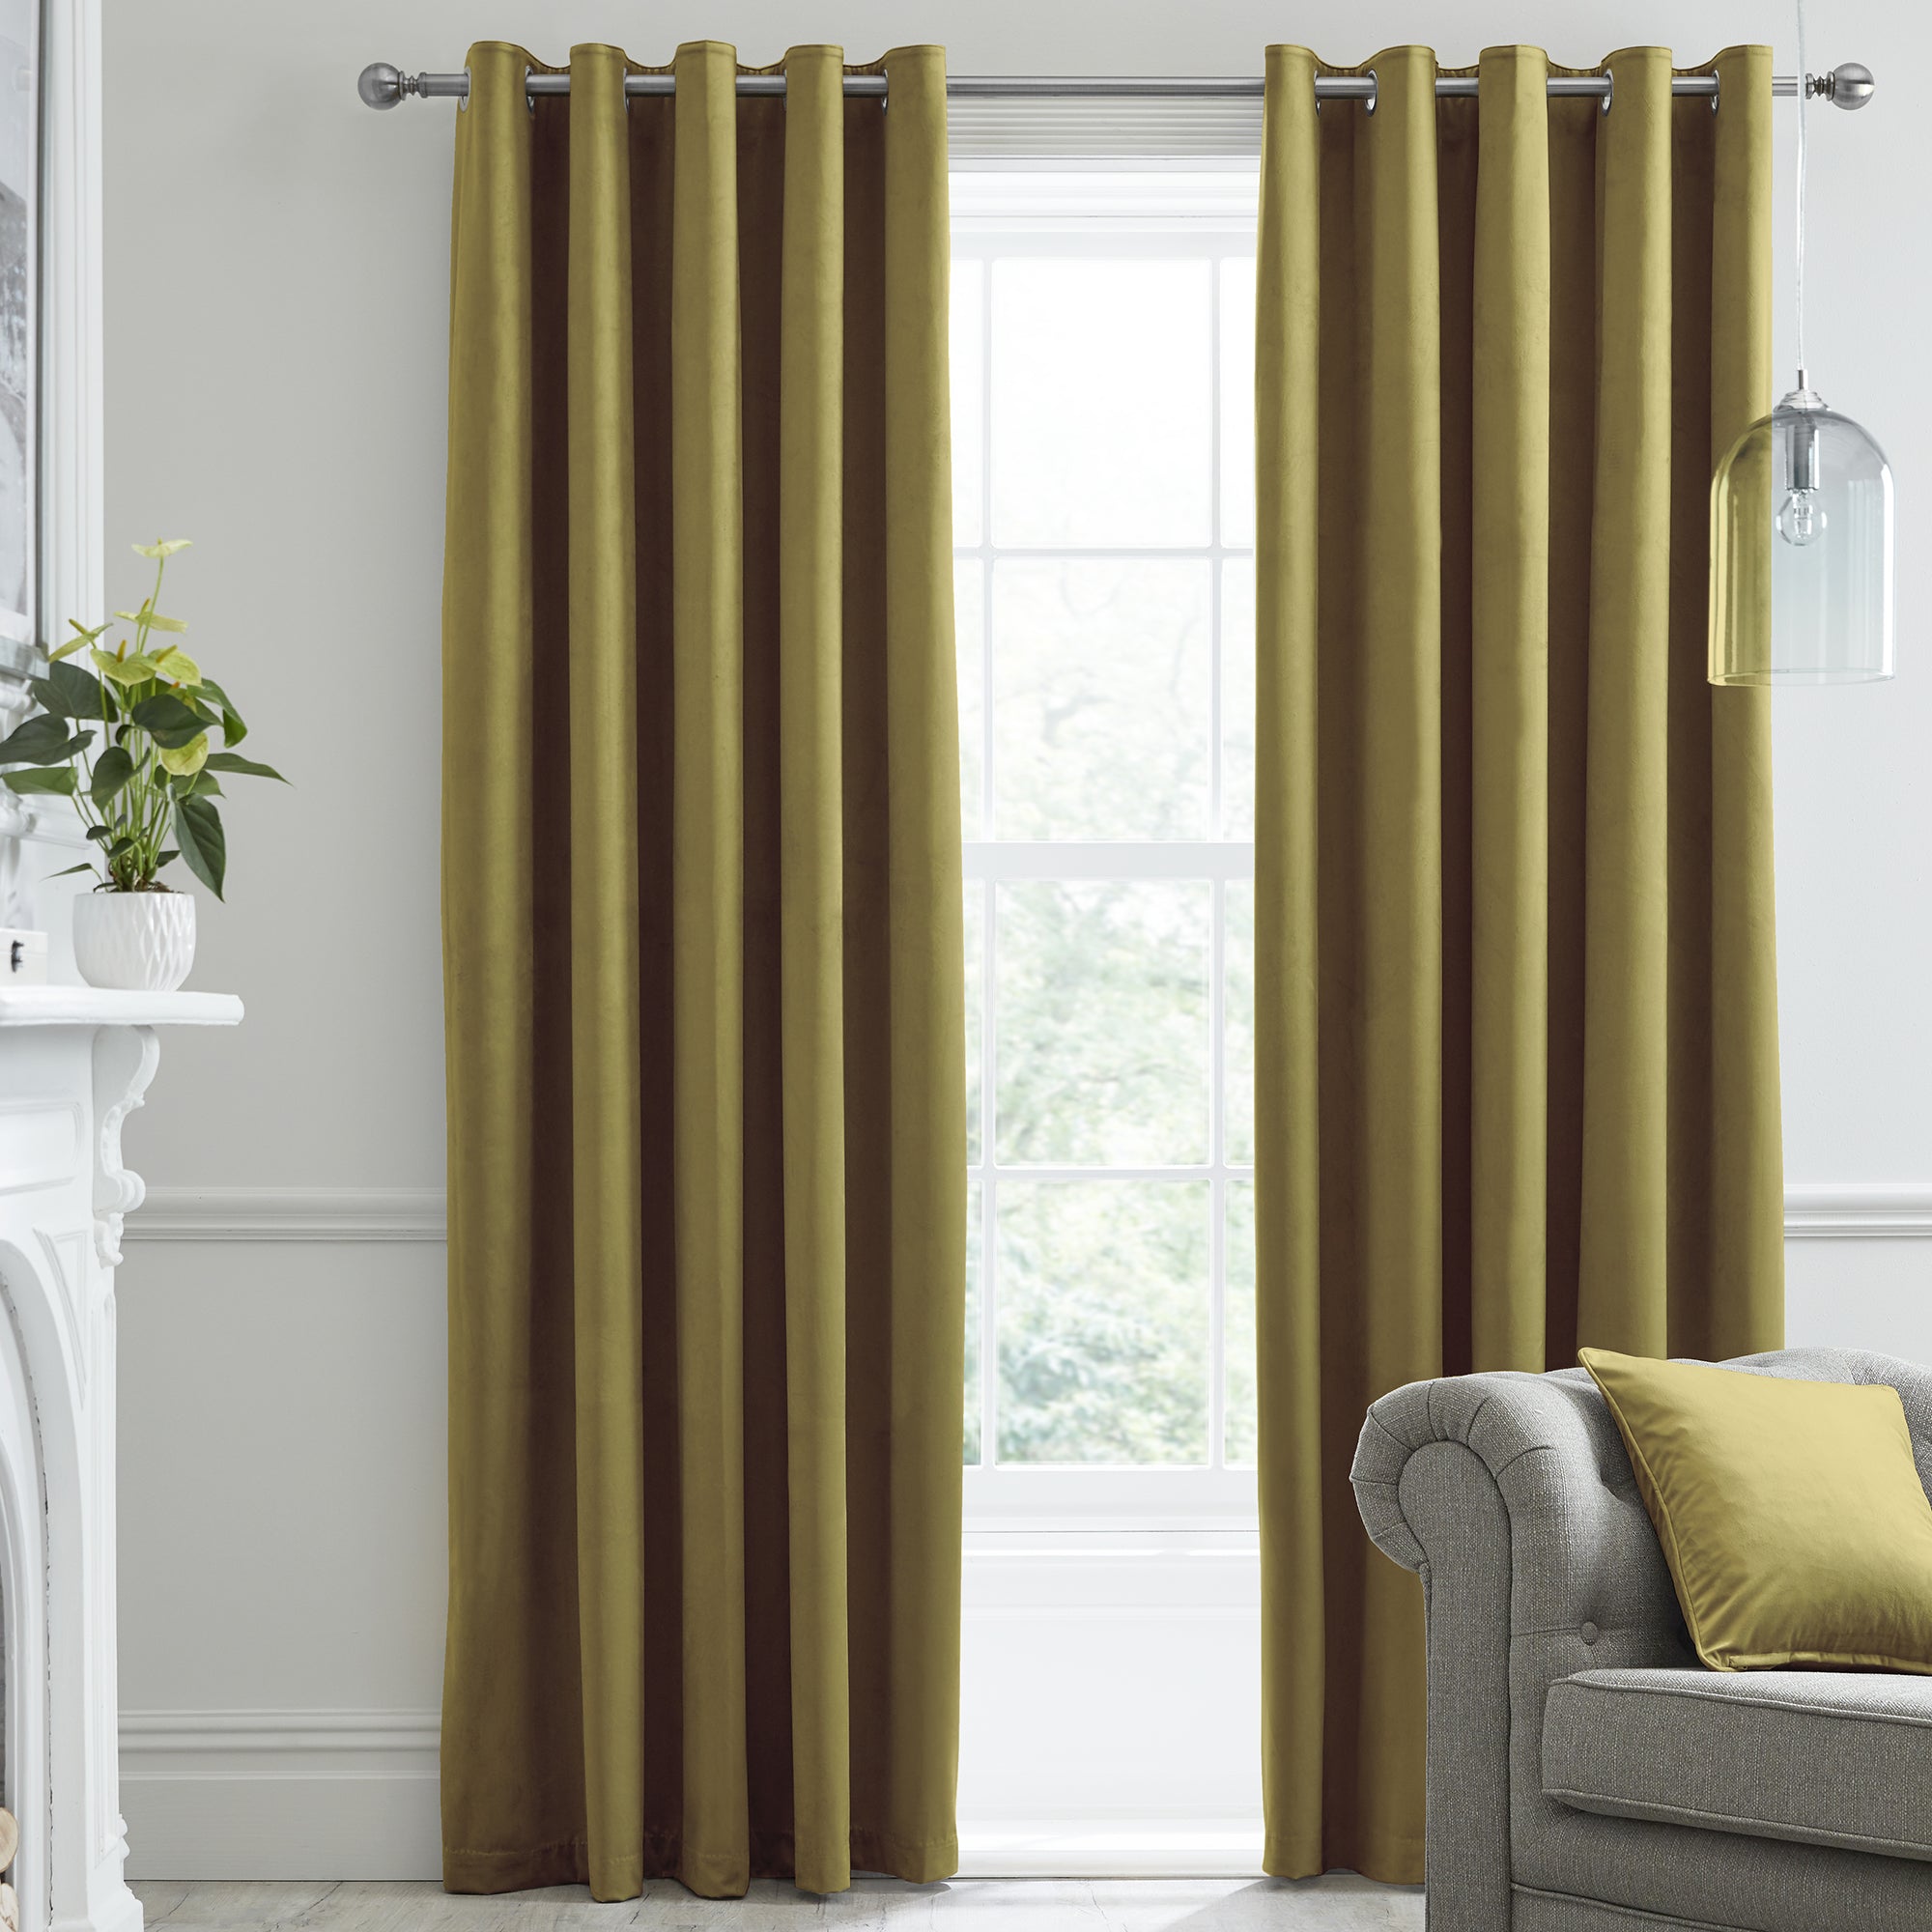 Montrose - Velvet Blackout Pair of Eyelet Curtains in Ochre - by Laurence Llewelyn-Bowen